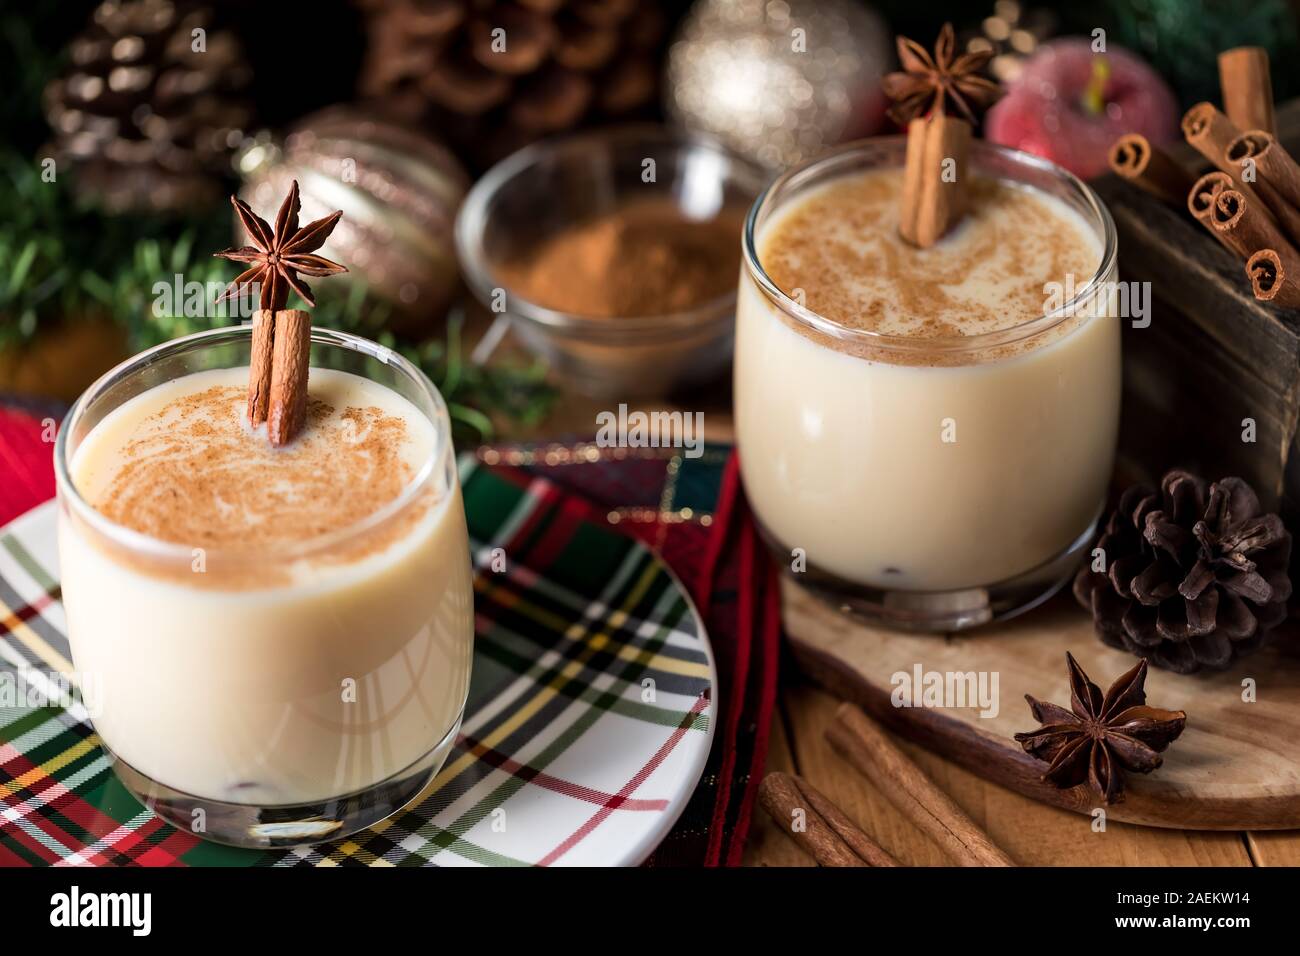 A close up view of two glasses of egg nog with cinnamon and star anise and surrounded by Christmas decorations. Stock Photo